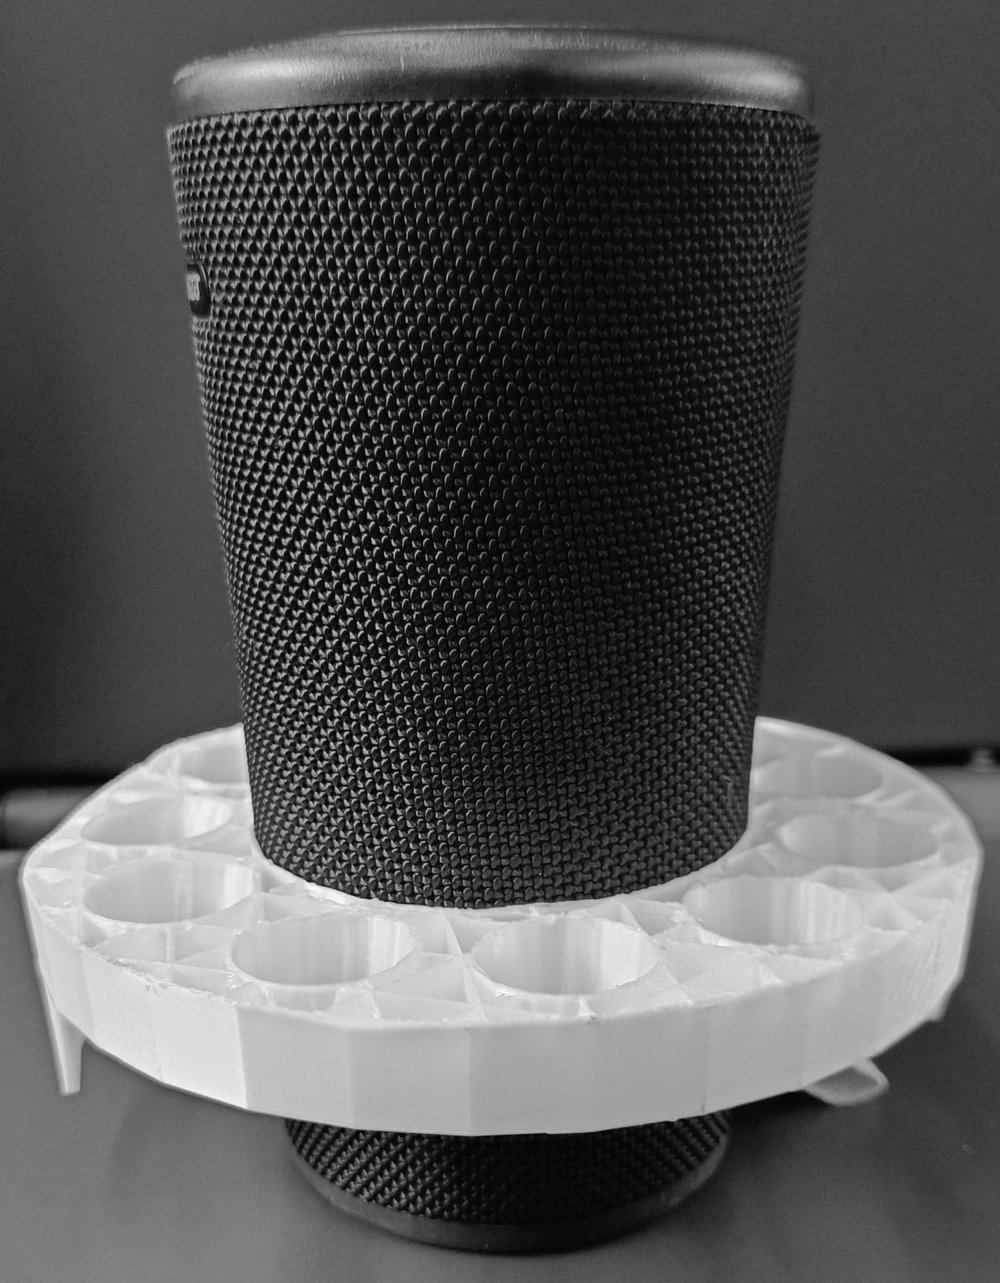 Figure 14: Multi-direction speaker with 3D-printed mount.